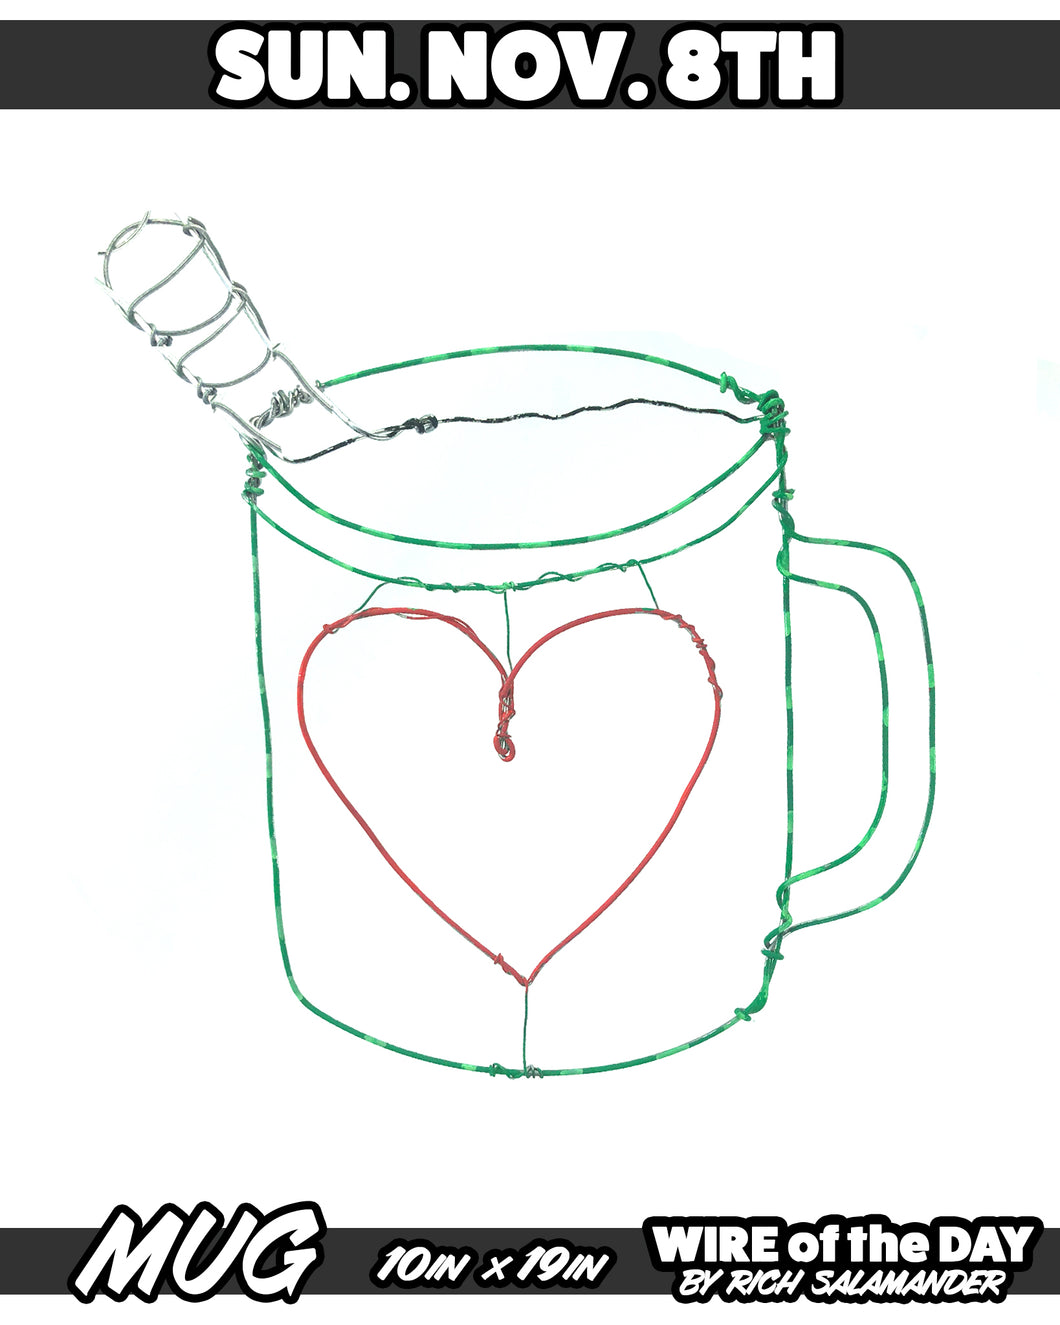 WIRE of the DAY MUG